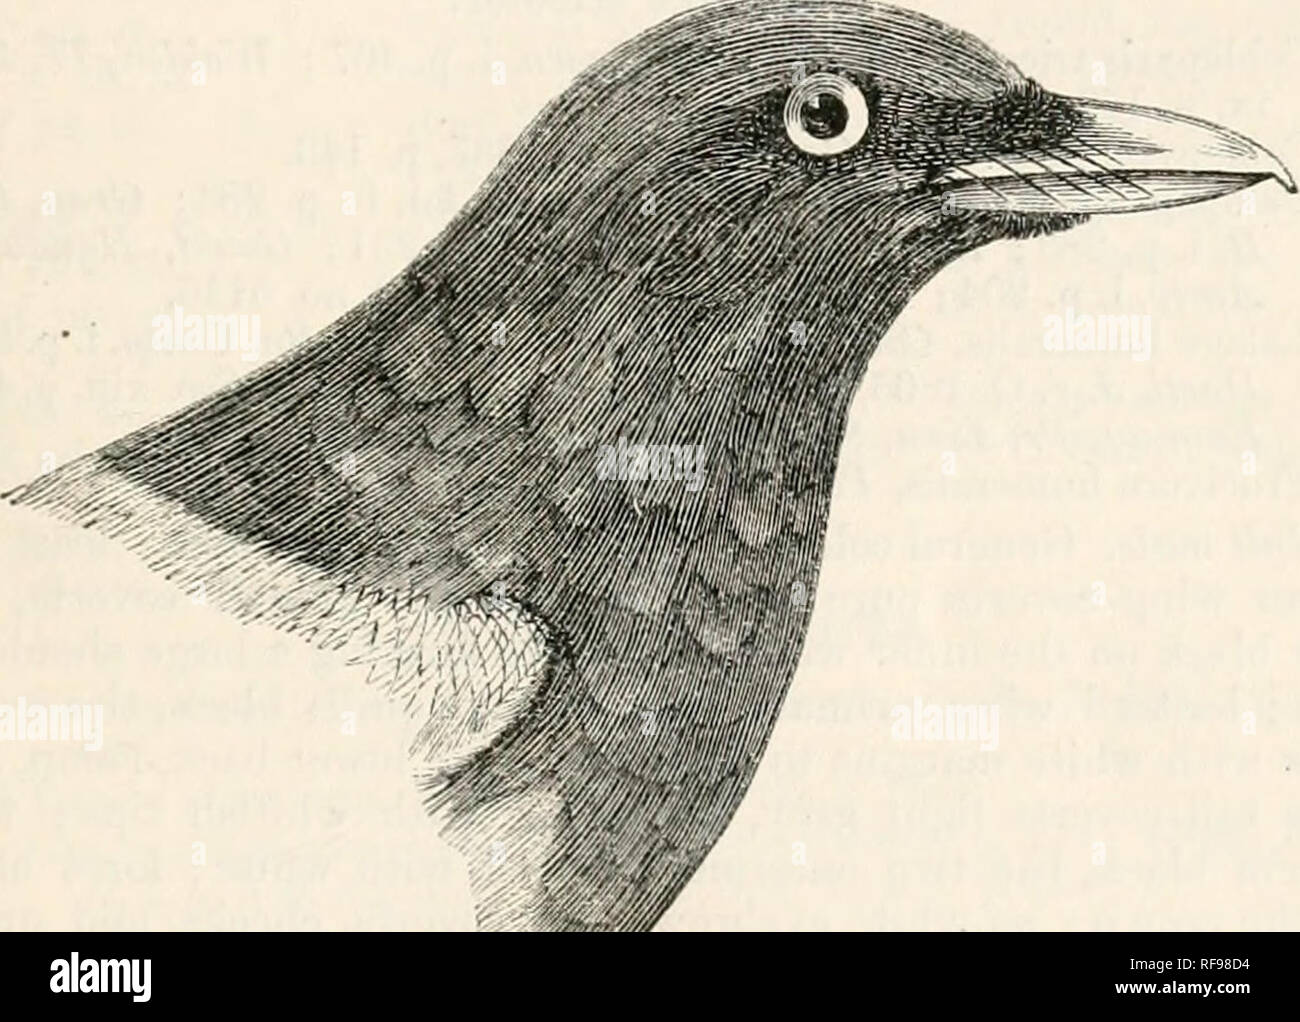 . Catalogue of the Birds in the British Museum. 9. LALAGE. 91 d. J ail. sk. Tvavaufore. Capt. BickUiljili [C.]. «, f-d^adsk. Mysore. Capt.C.H.T. Marshall [P.]. (/.' 2 ad. sk. 'ingorla, Jan. 1809. Colonel Sturt [P.]. 'h. d&quot; ad. sk. Mahabaleshwur Hills. Colonel Sturt [P.! &gt;j- 6 $ ad.sk. NevaraEliya,Ceylon. Mr. E. Boate [C.J. h. cS ad. sk. Ceylon. Huorh Ciiminf^, Esq. [C.]. /. J ad., «i. d&quot;.i nv.sk. Central Provinces, A. Whyte, Esq. [C.]. Ceylon. Subsp. a. Lalage melanothorax. Similar to L. s^j/lrsi, but with a very much larger bill; the whole head and neck and the throat and ches Stock Photo